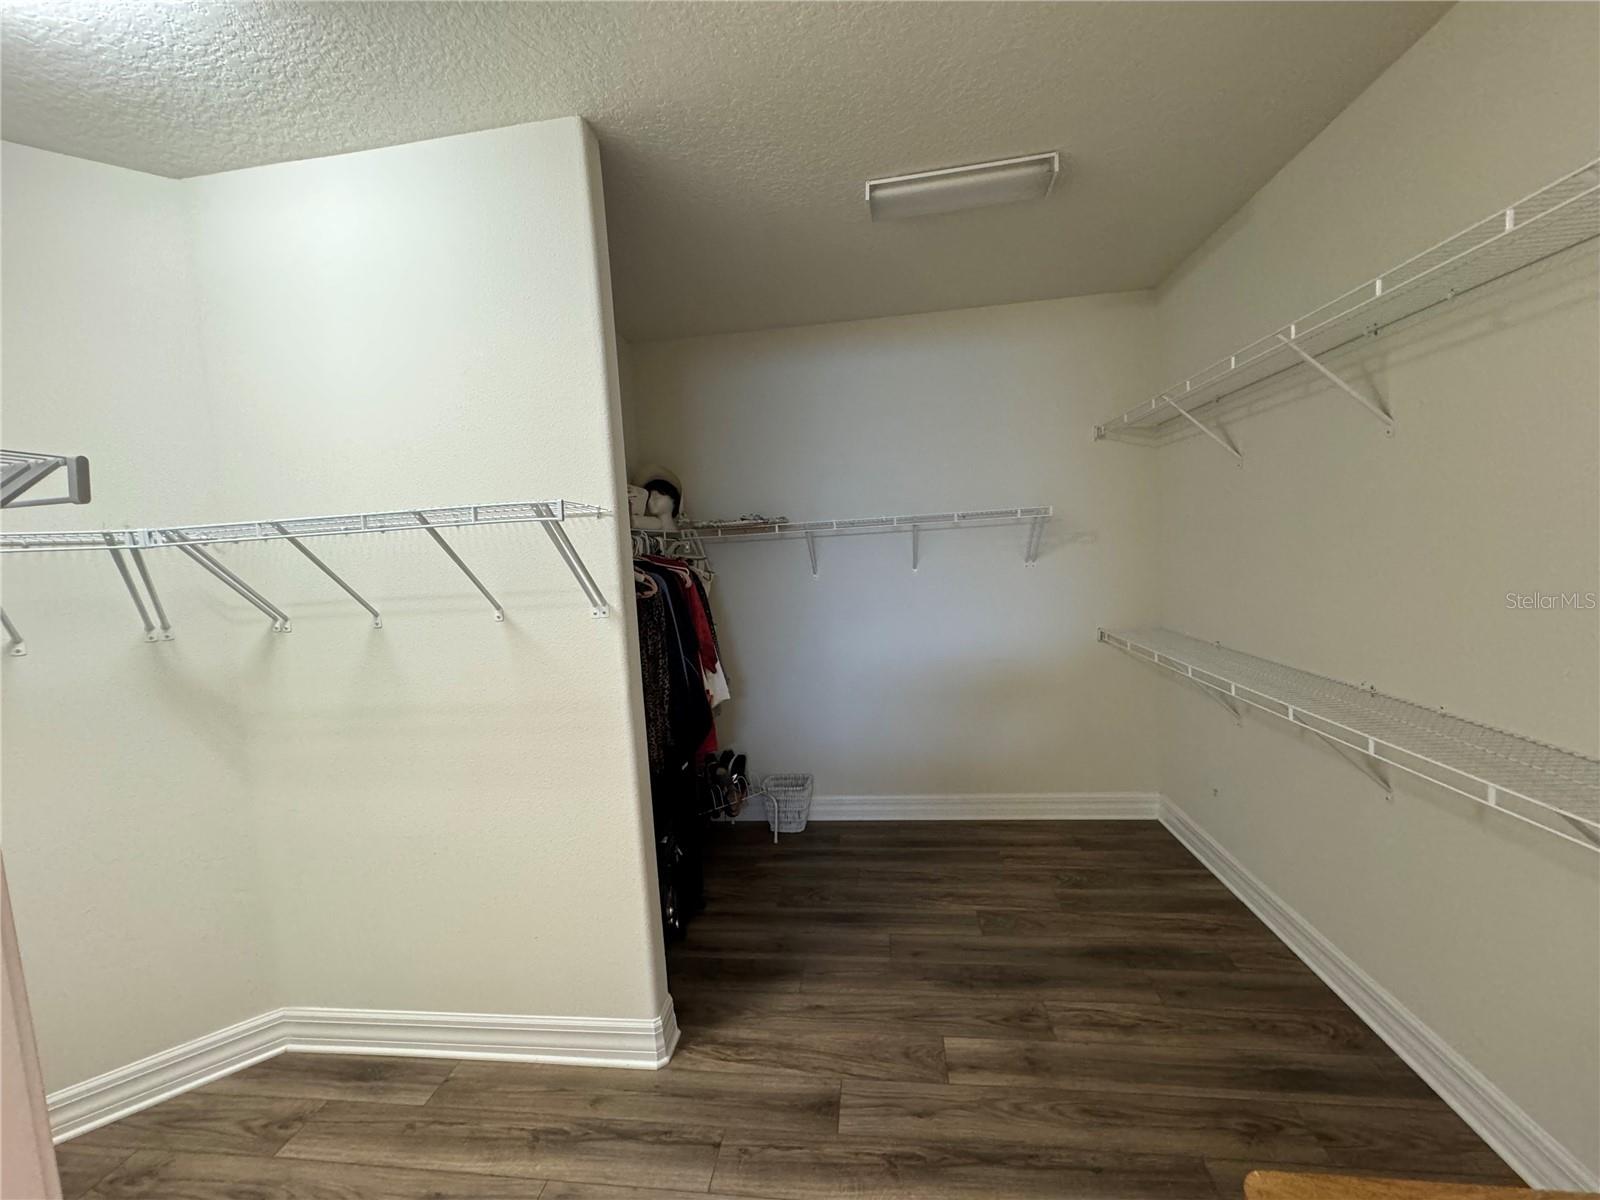 Large double walk-in closet